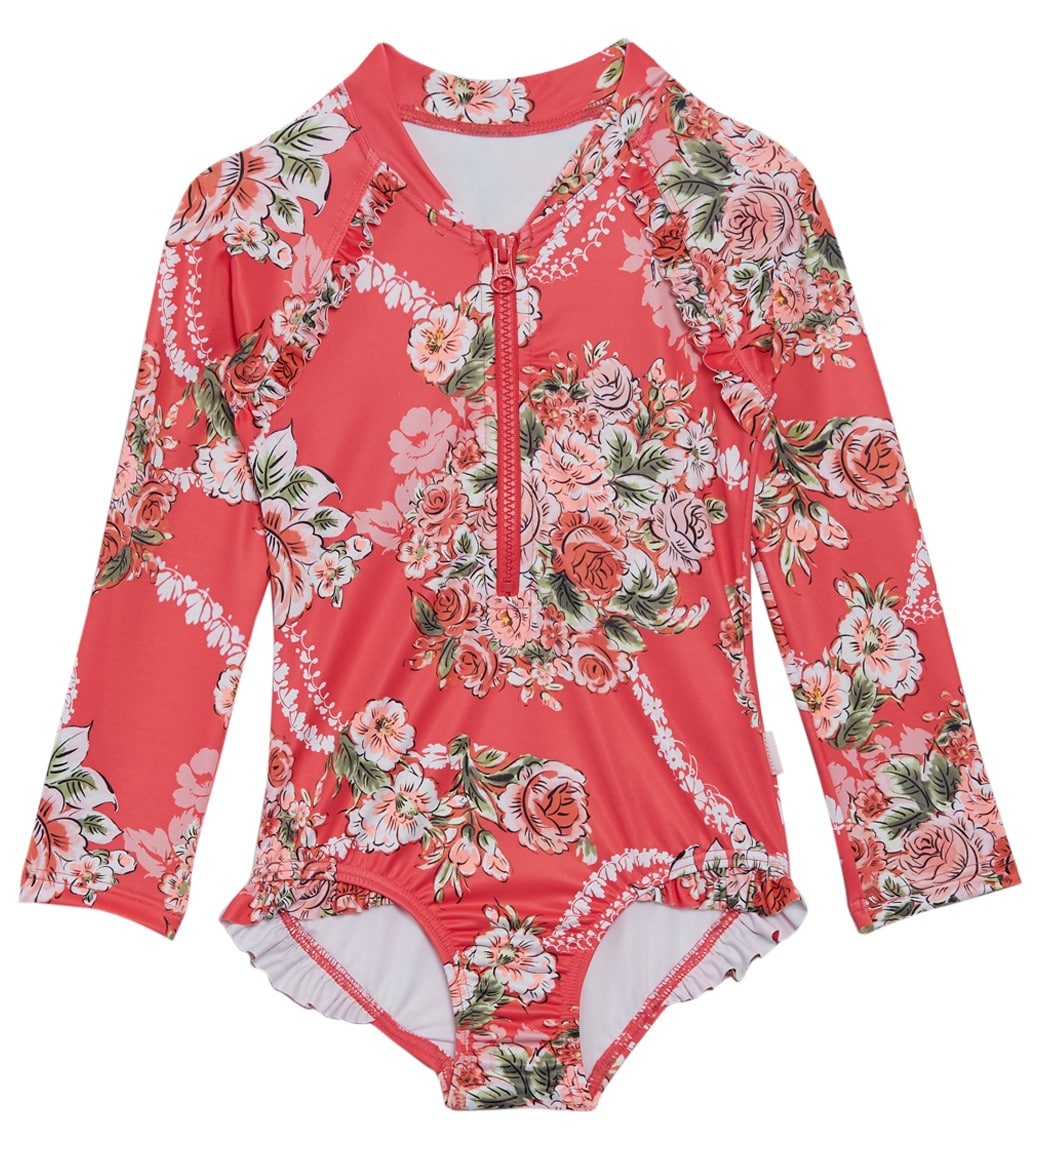 Seafolly Girls' Little Village In Como Long Sleeve Shirt Surf One Piece Swimsuit Baby Toddler Kid - Rose Pink 1 - Swimoutlet.com